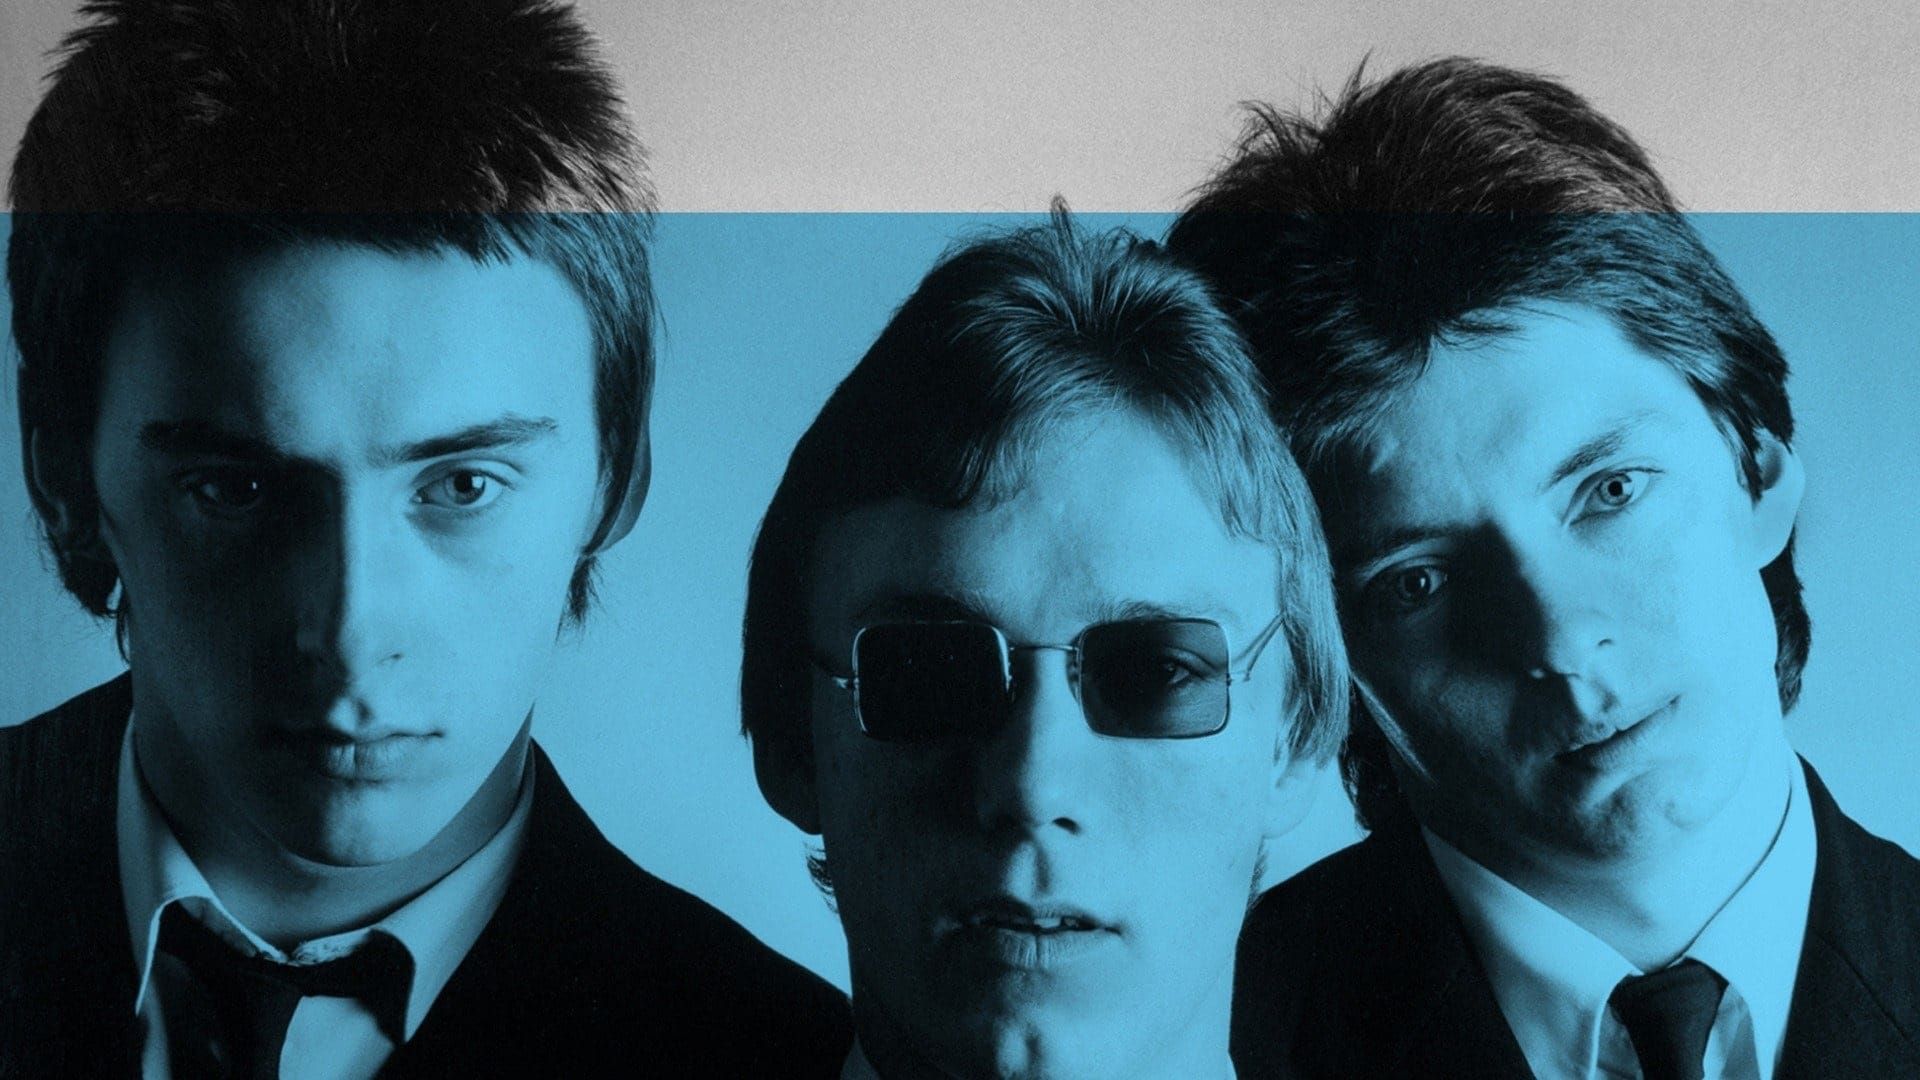 The Jam: About the Young Idea background